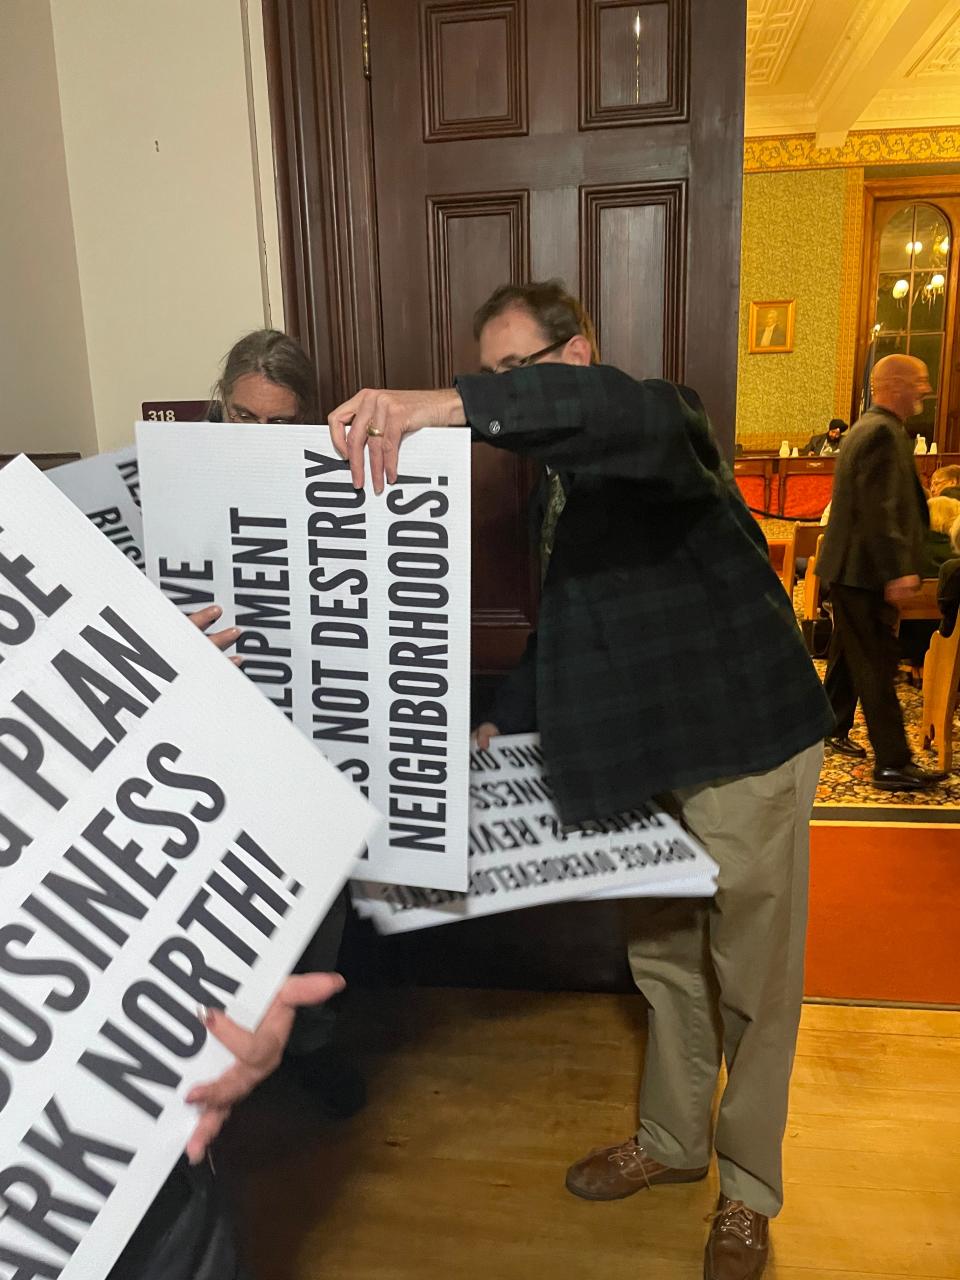 Norwich resident Frederick Browning (center) passes out signs at Tuesday night's city council meeting, where zoning needed for the controversial Business Park North was defeated.